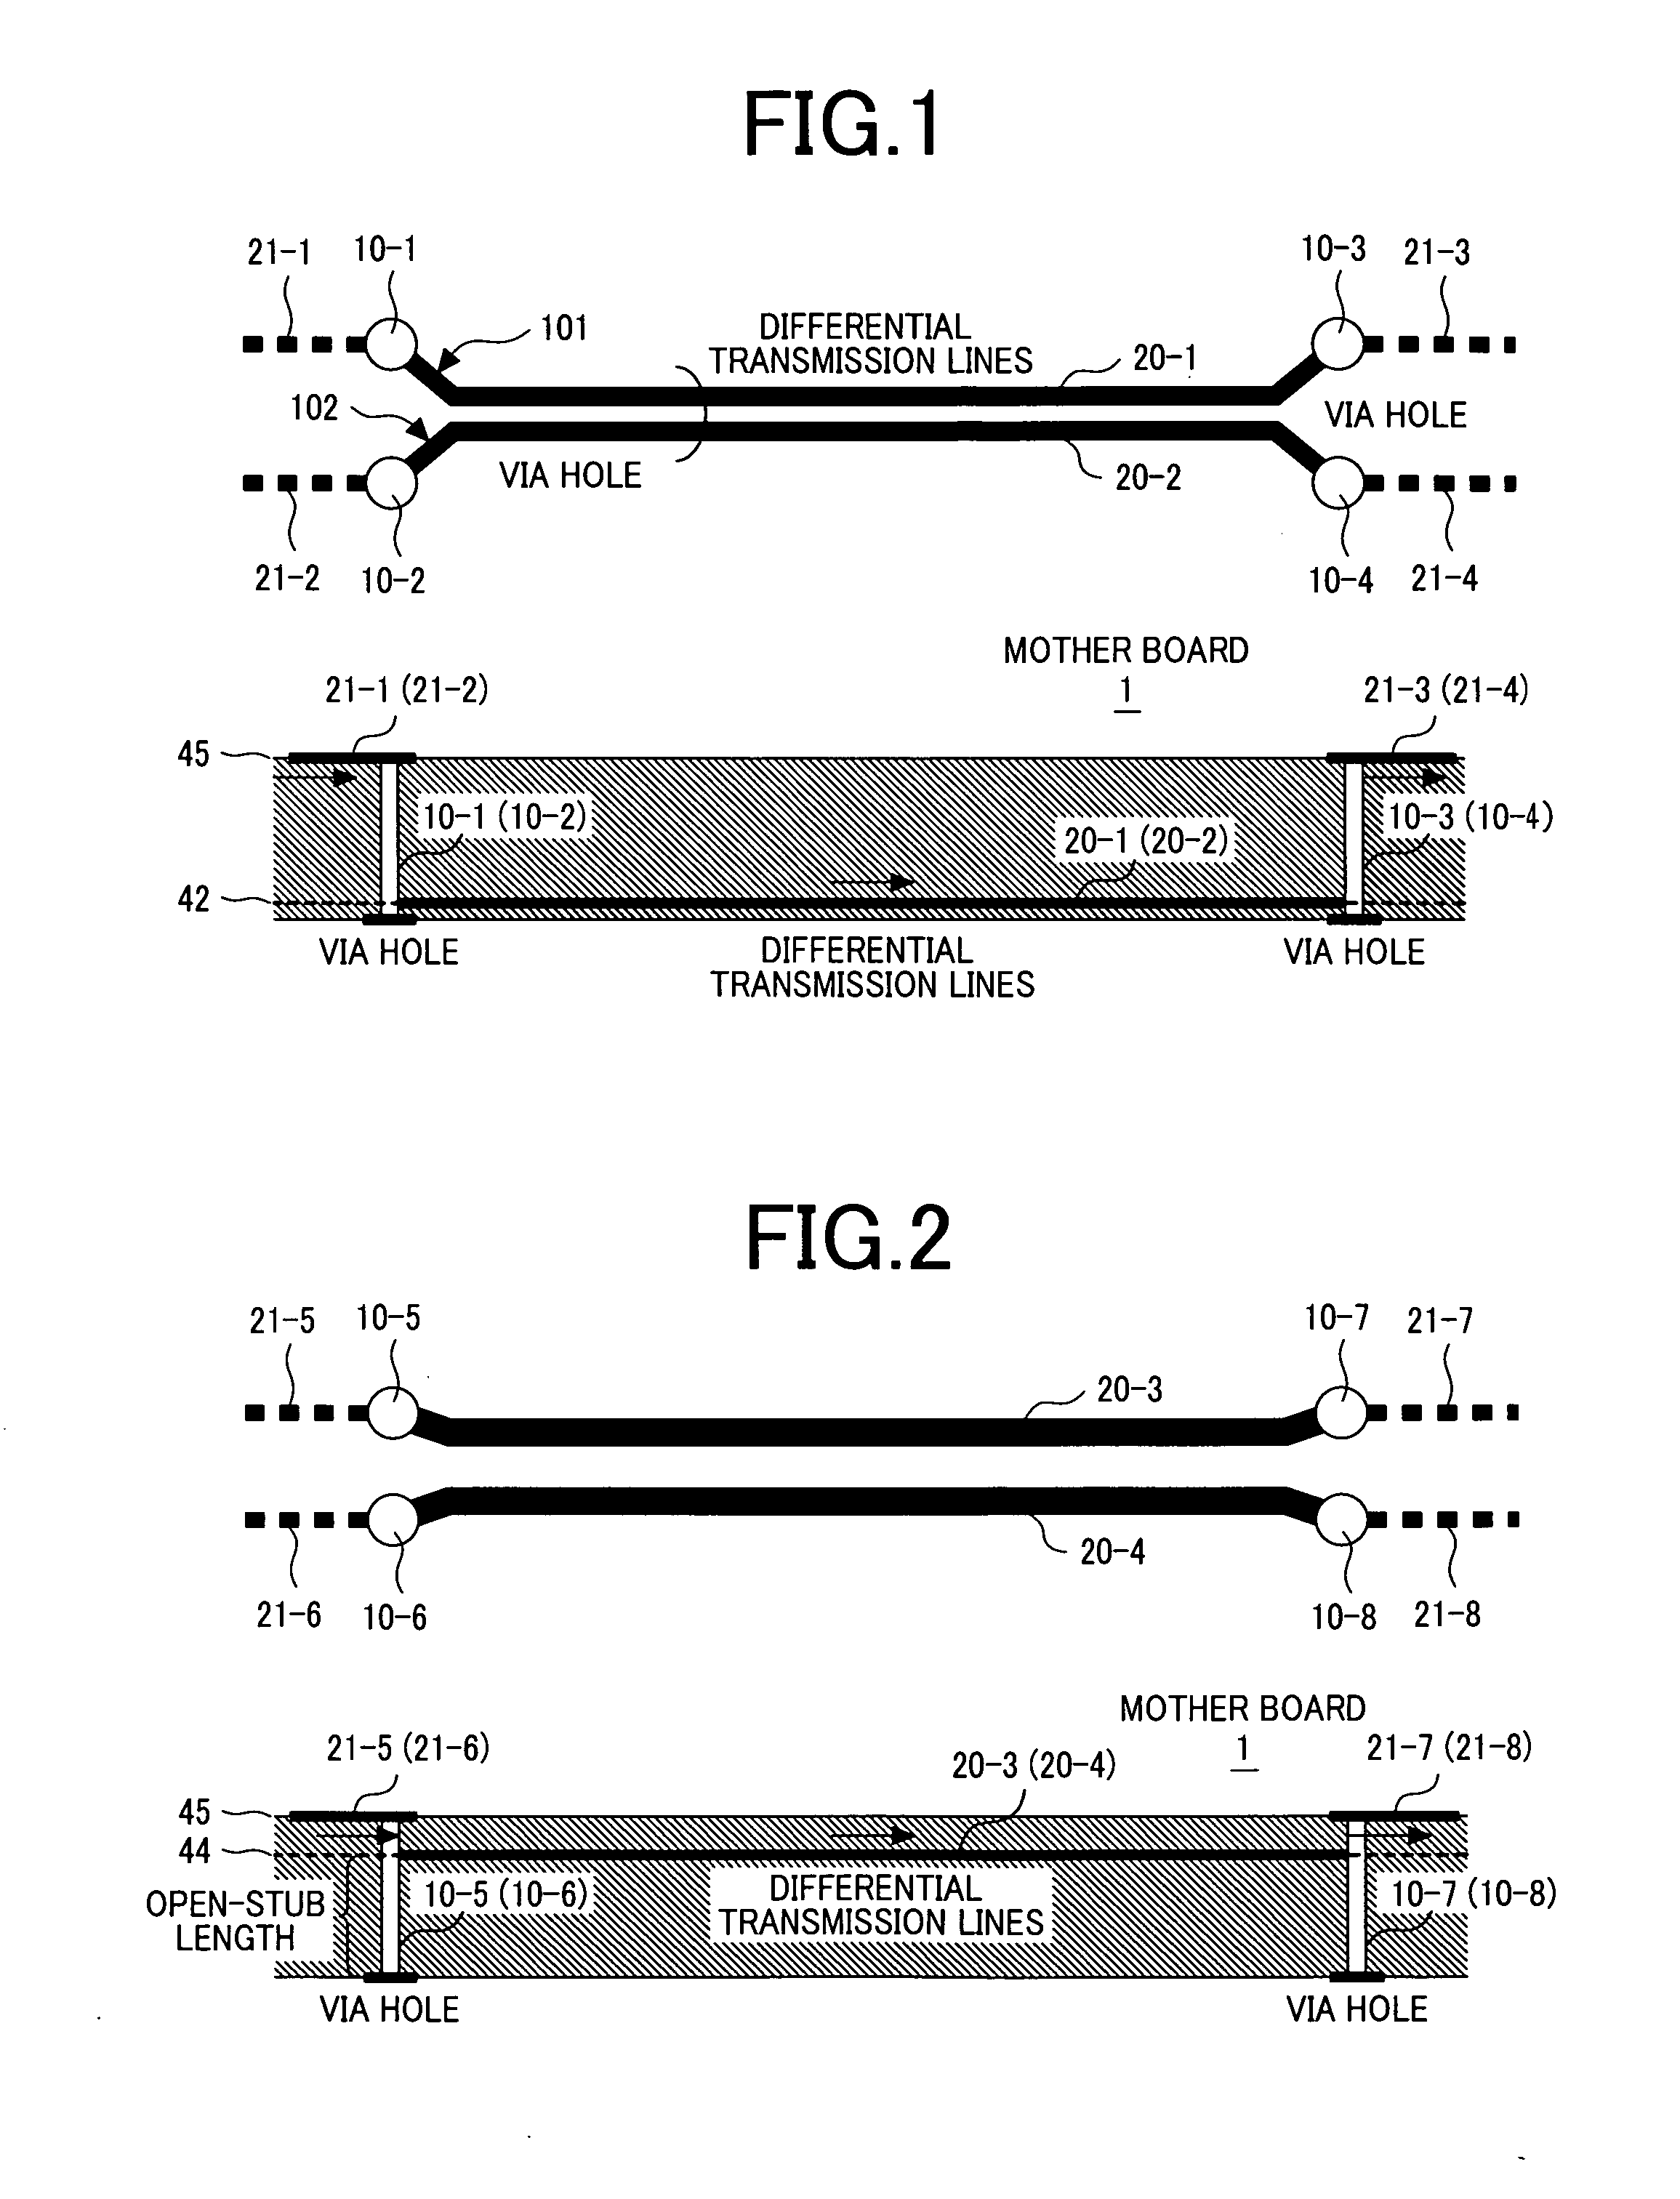 Multilayer printed circuit board for high-speed differential signal, communication apparatus, and data storage apparatus